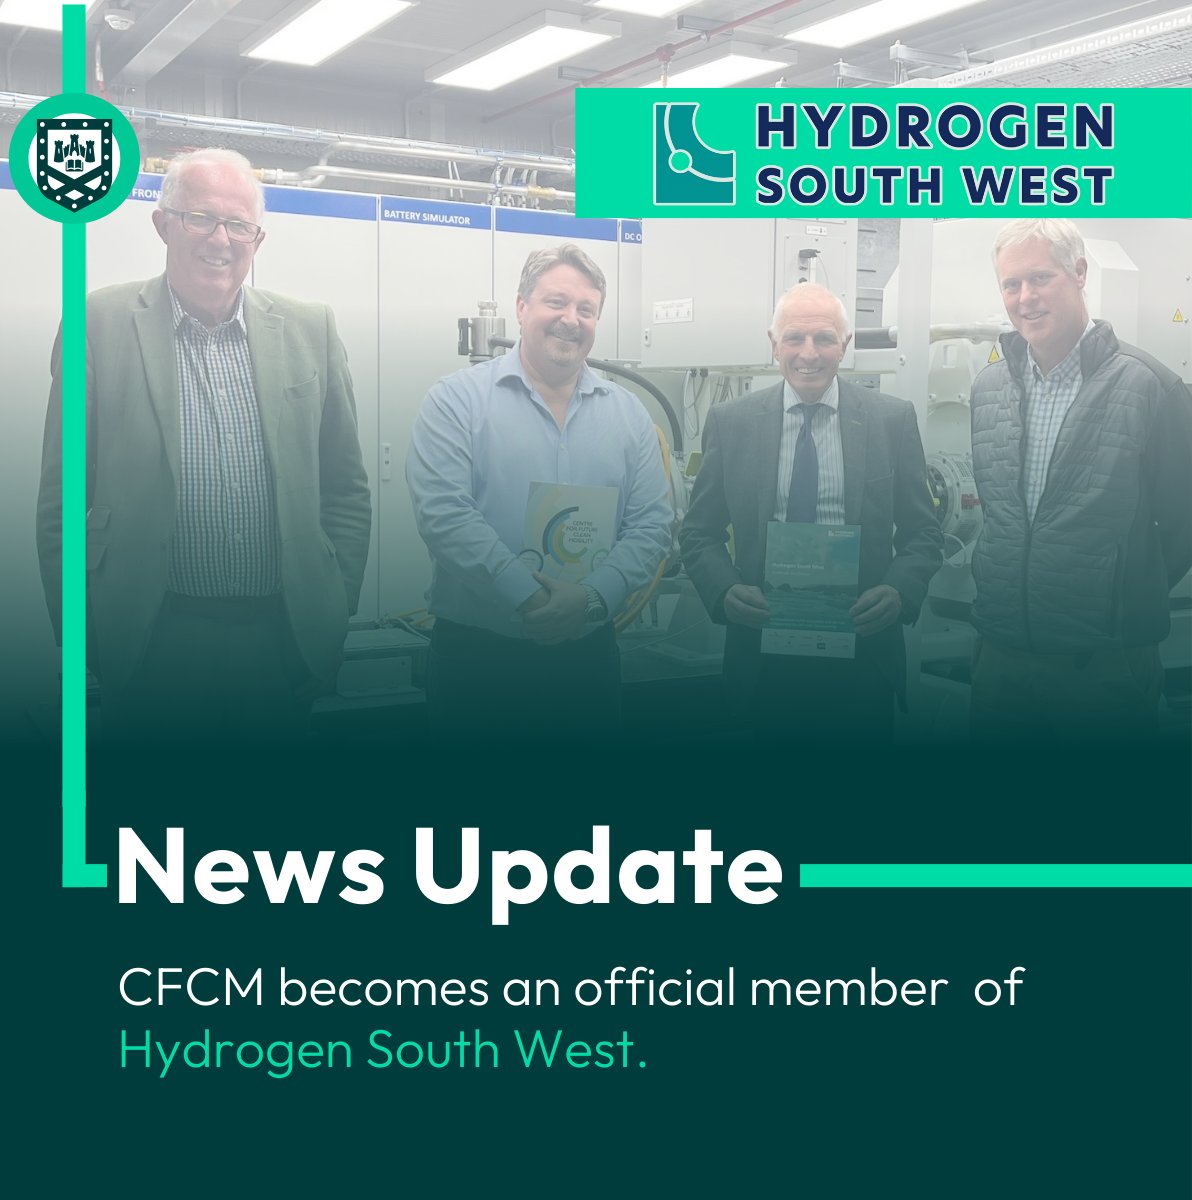 News Update - CFCM has officially joined @hydrogen_sw and are excited to collaborate with its innovative members who share our commitment to a sustainable future.  
#CFCMExeter #CFCM #HSW #HydrogenSouthWest #CleanPropulsion #NetZero #GreenFutures